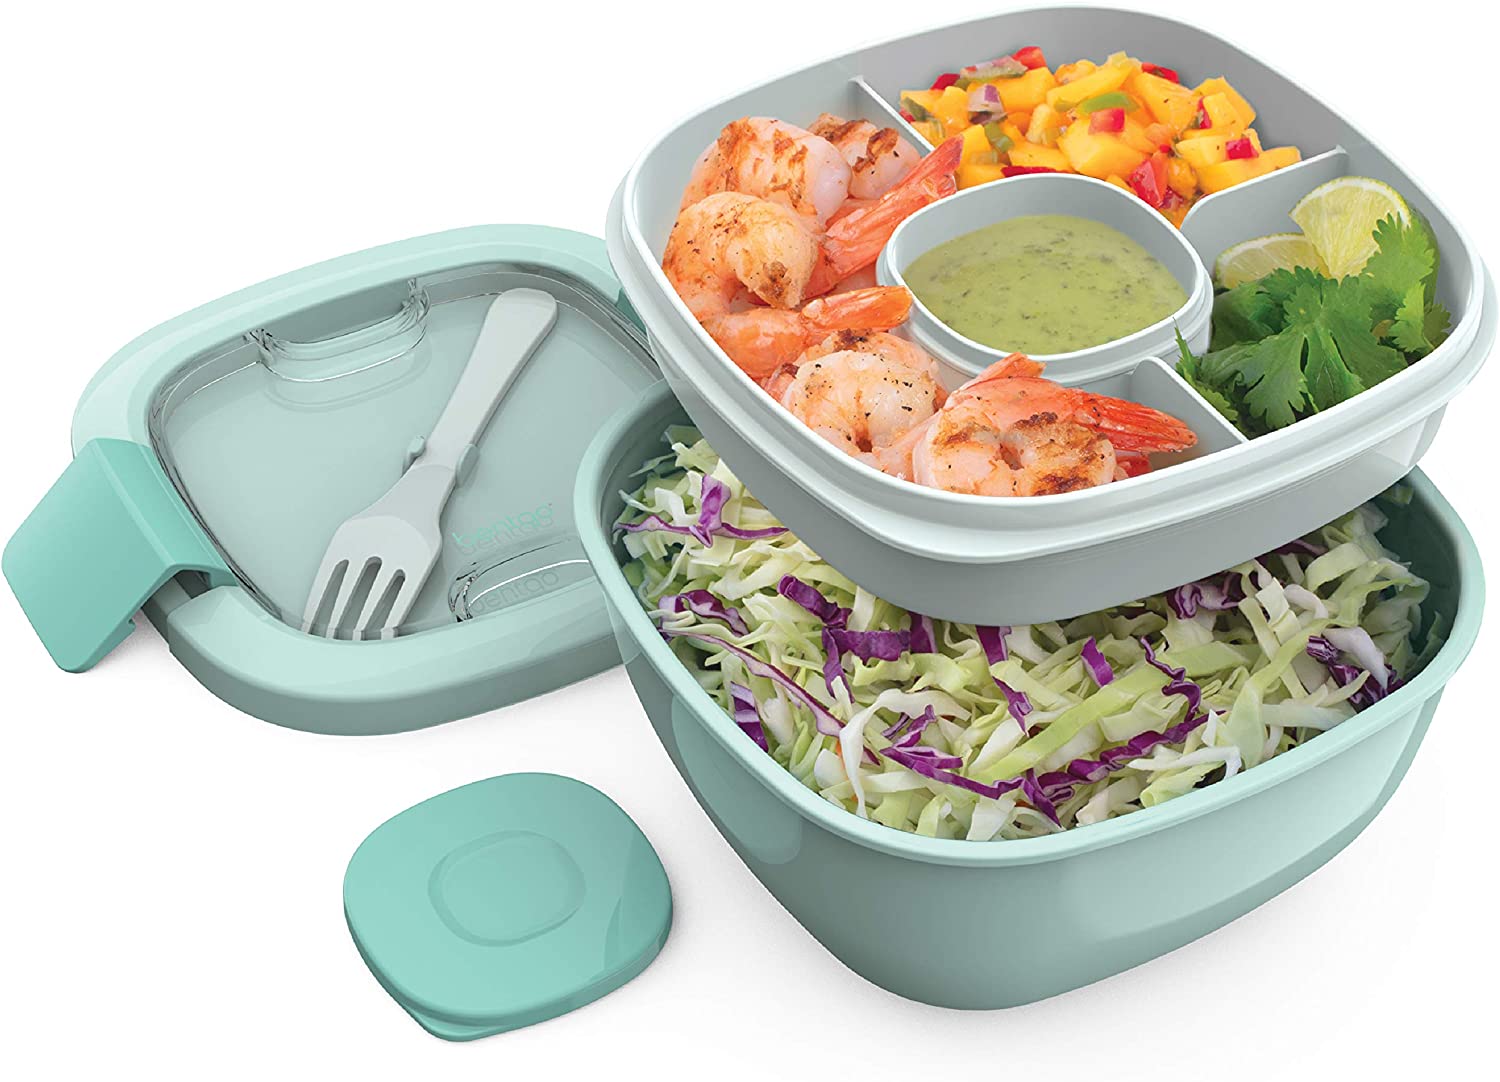 Bentgo® Salad - Stackable Lunch Container with Large 54-oz Salad Bowl, 4-Compartment Bento-Style Tray for Toppings, 3-oz Sauce Container for Dressings, Built-In